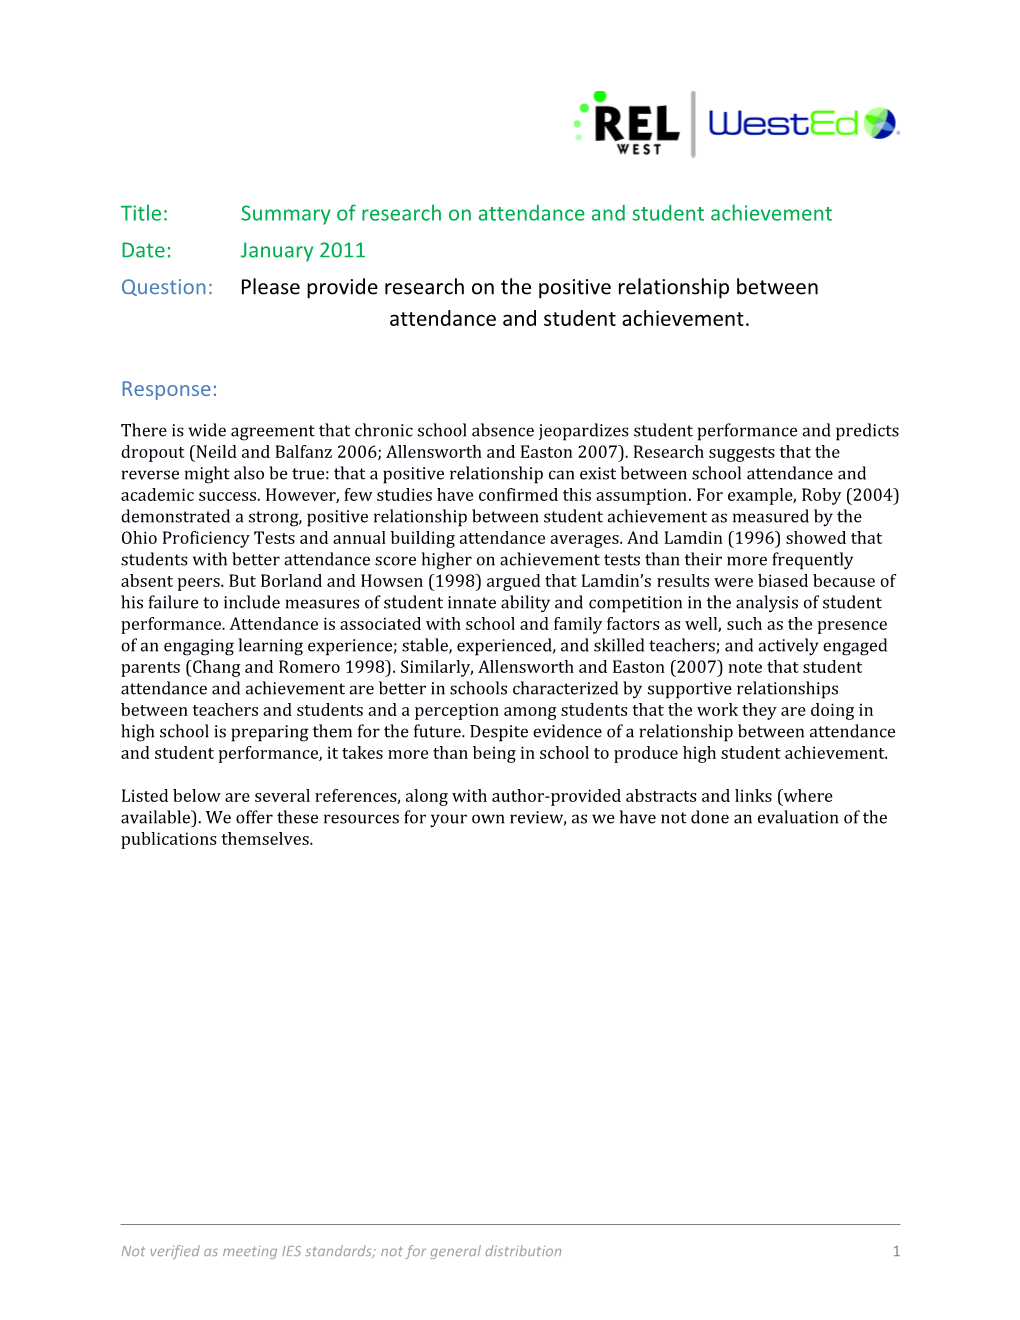 Title: Summary of Research on Attendance and Student Achievement